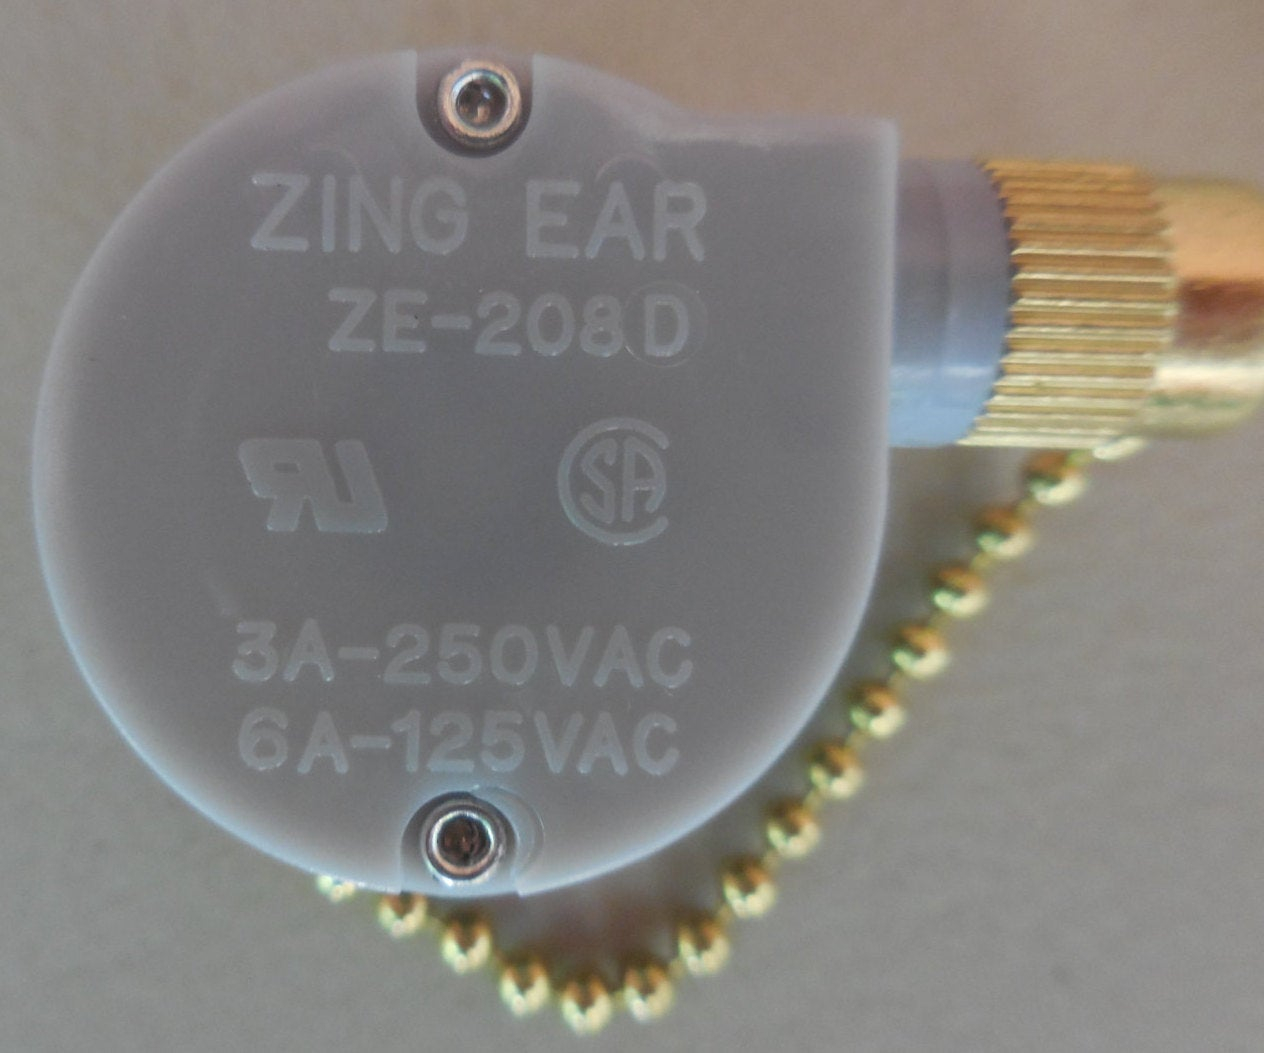 Zing Ear Ze 208d 3 Speed Control 3 Condensateur Pour 5 8 Wire Pull Chain Ceiling Fan Switch Made Instructions Enclosed 8a5e inside sizing 1264 X 1053